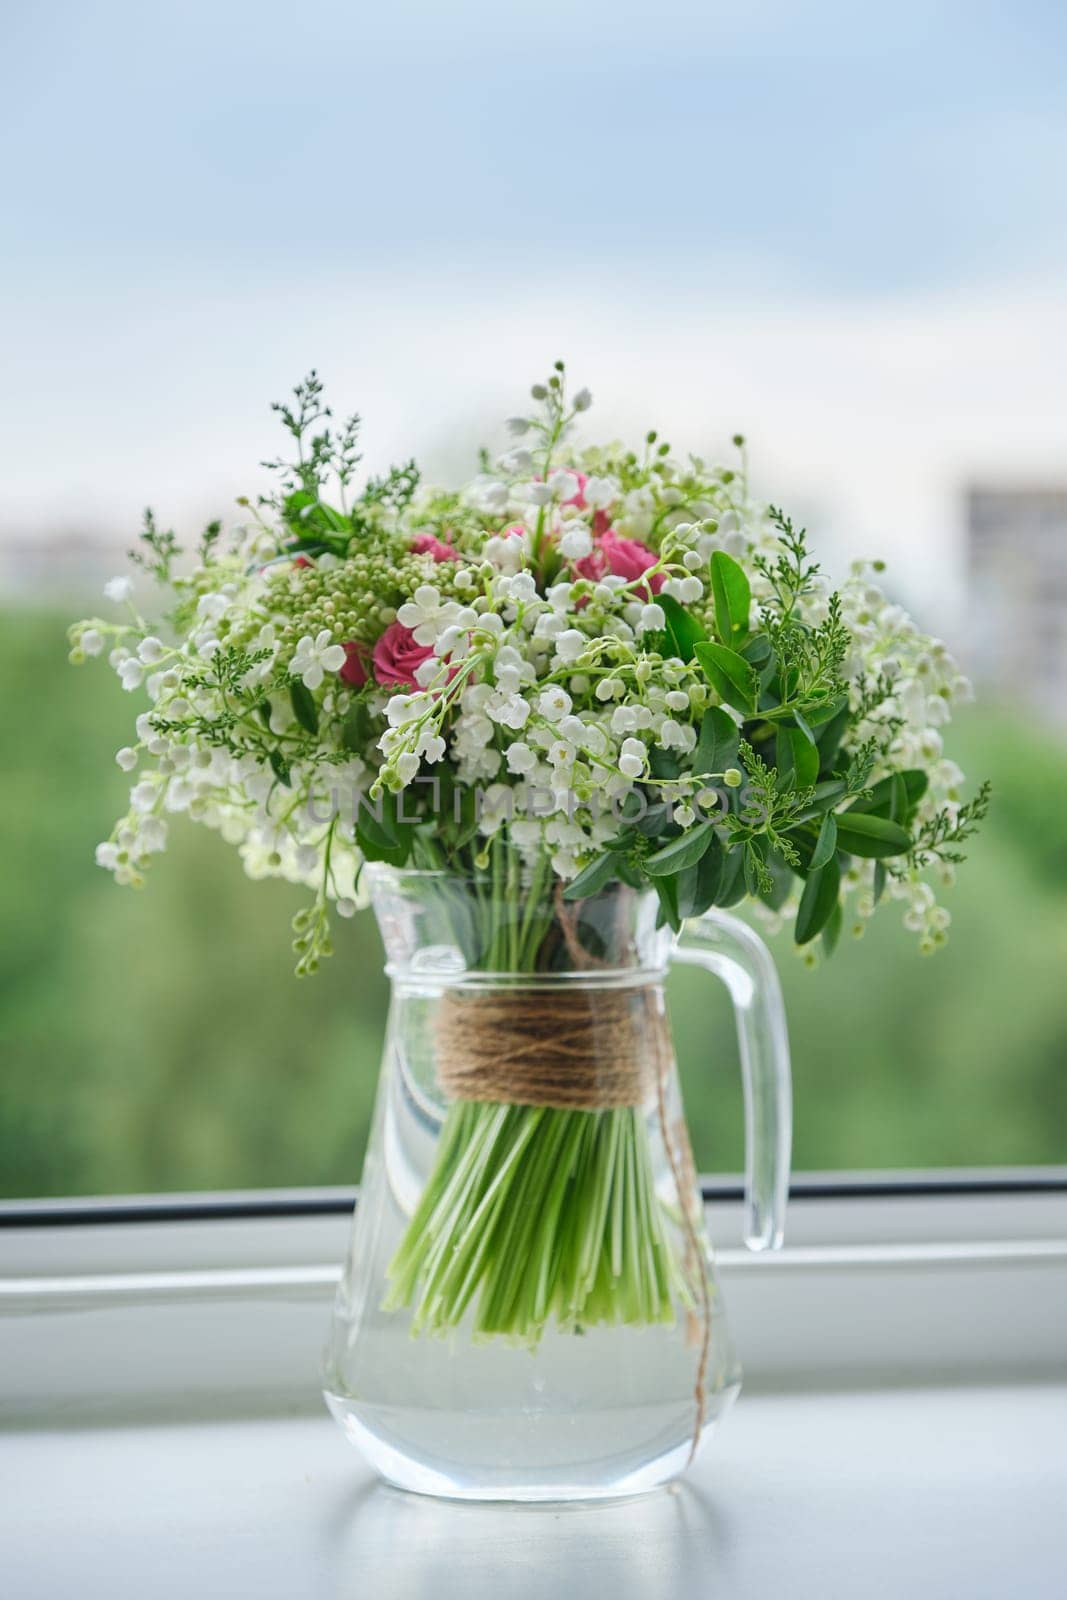 Springtime, spring fresh bouquet of lilies of the valley, pink roses, blooming viburnum. Bouquet in glass jug on windowsill, open window background